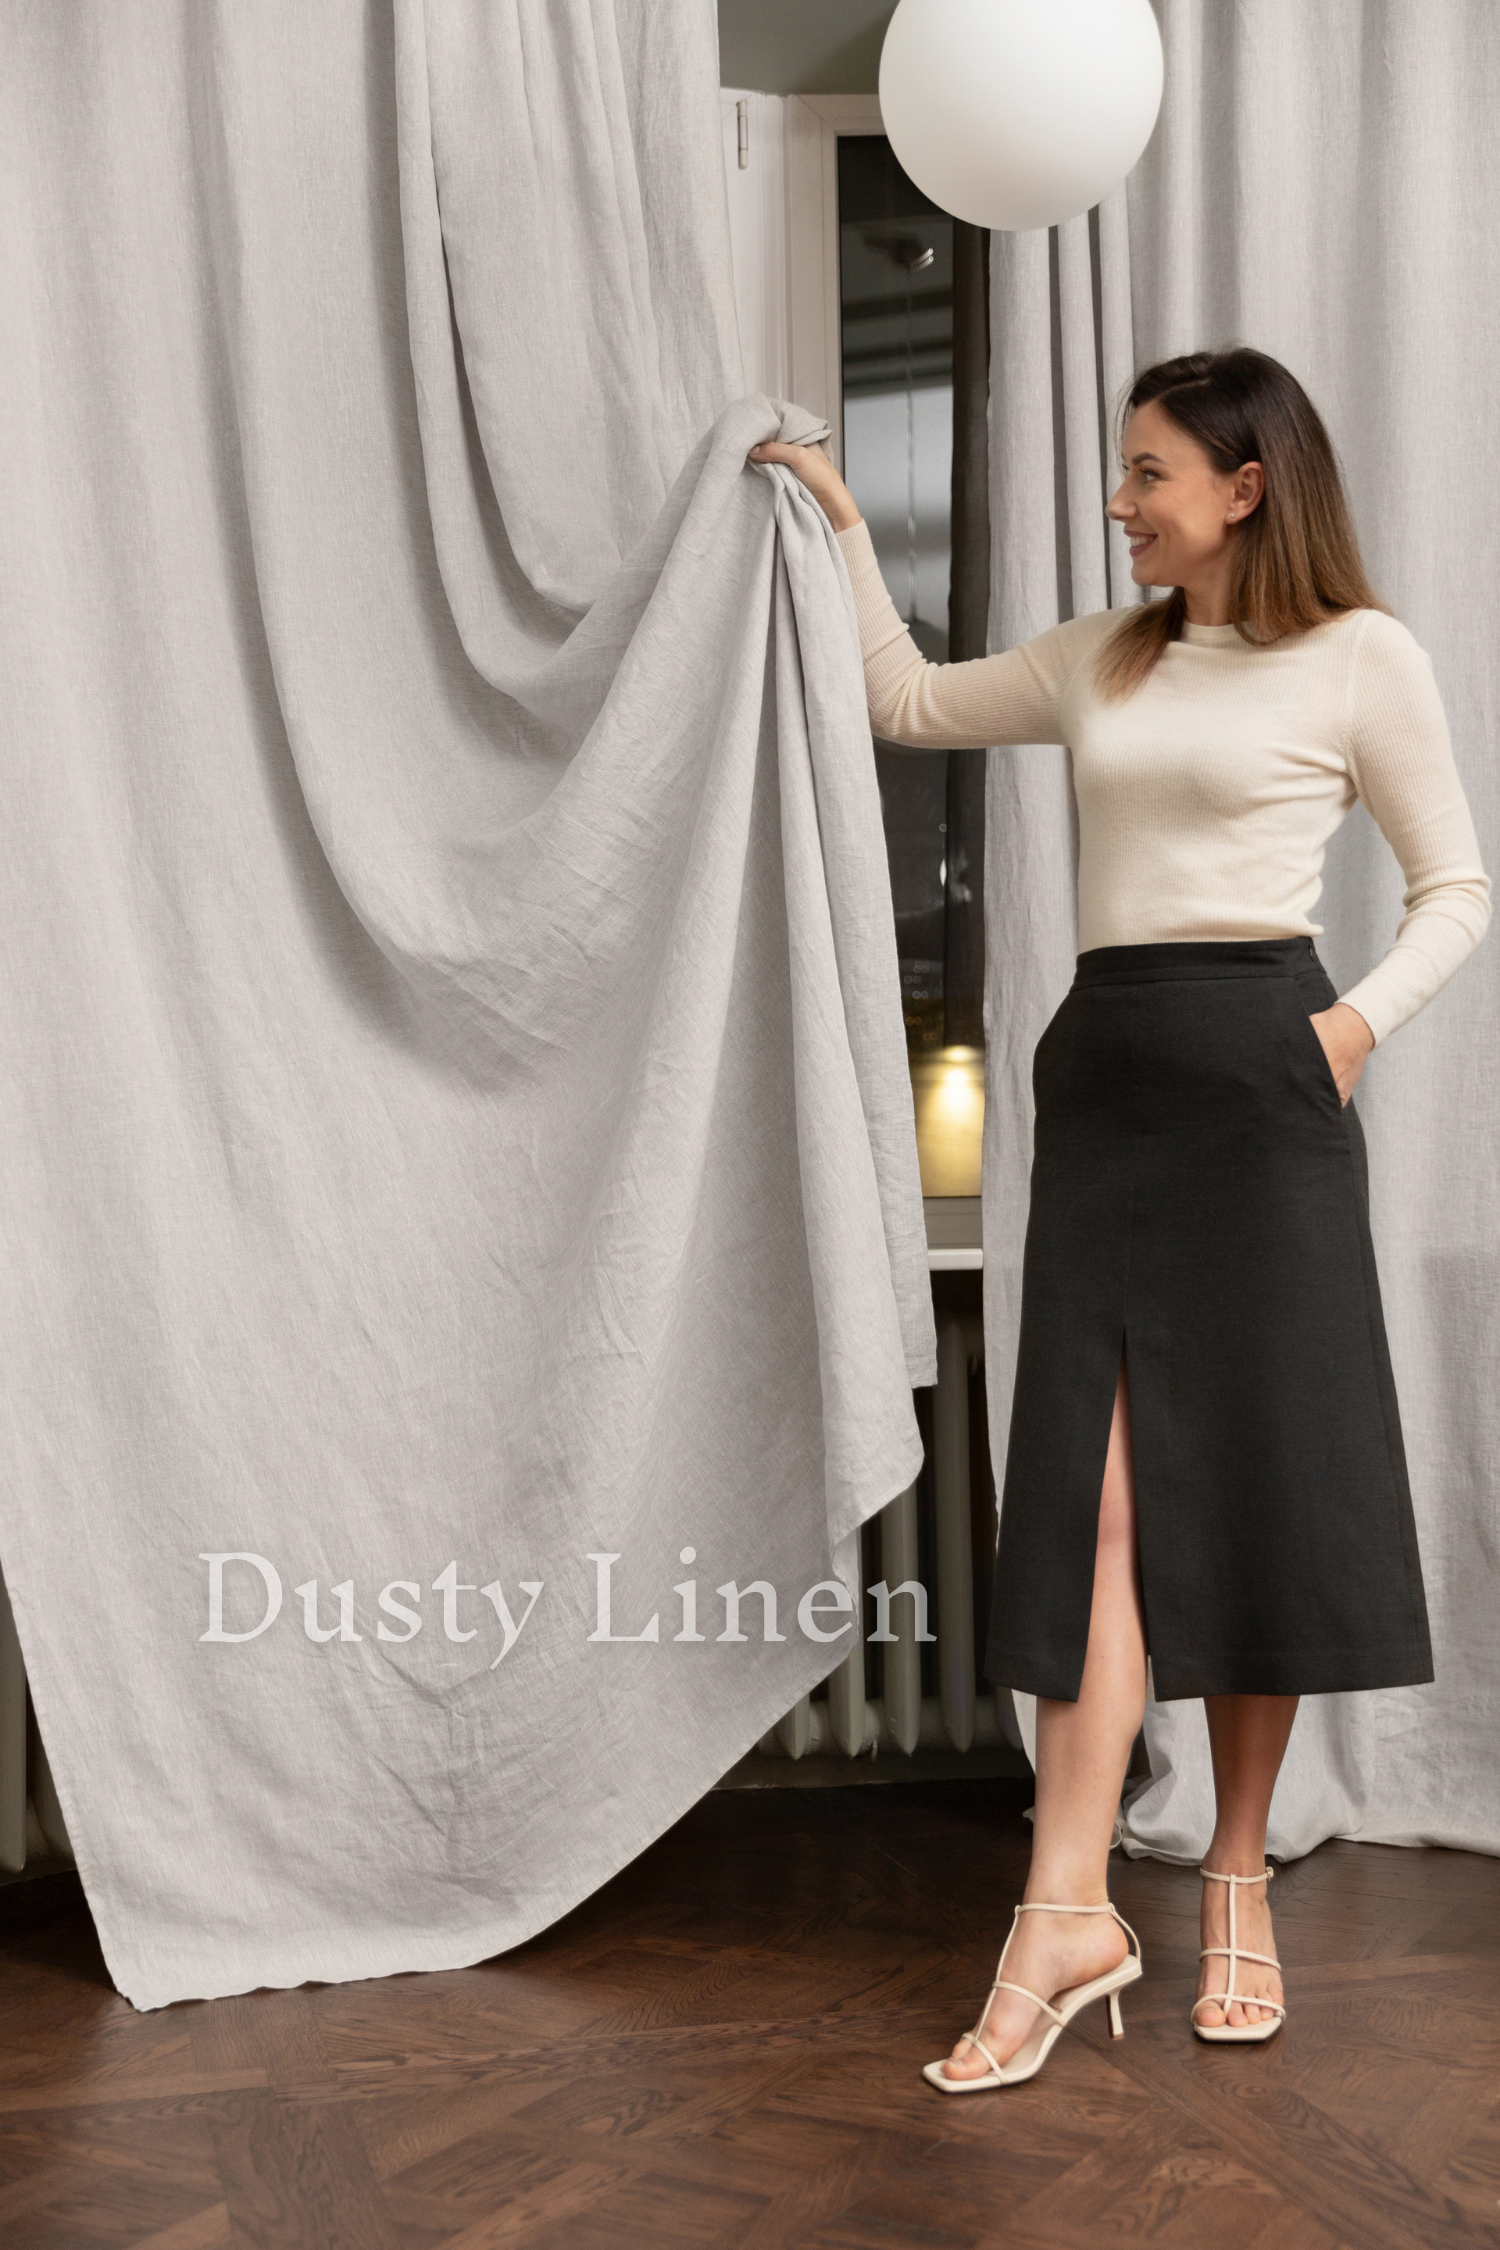 a woman holding a white ball in front of a curtain